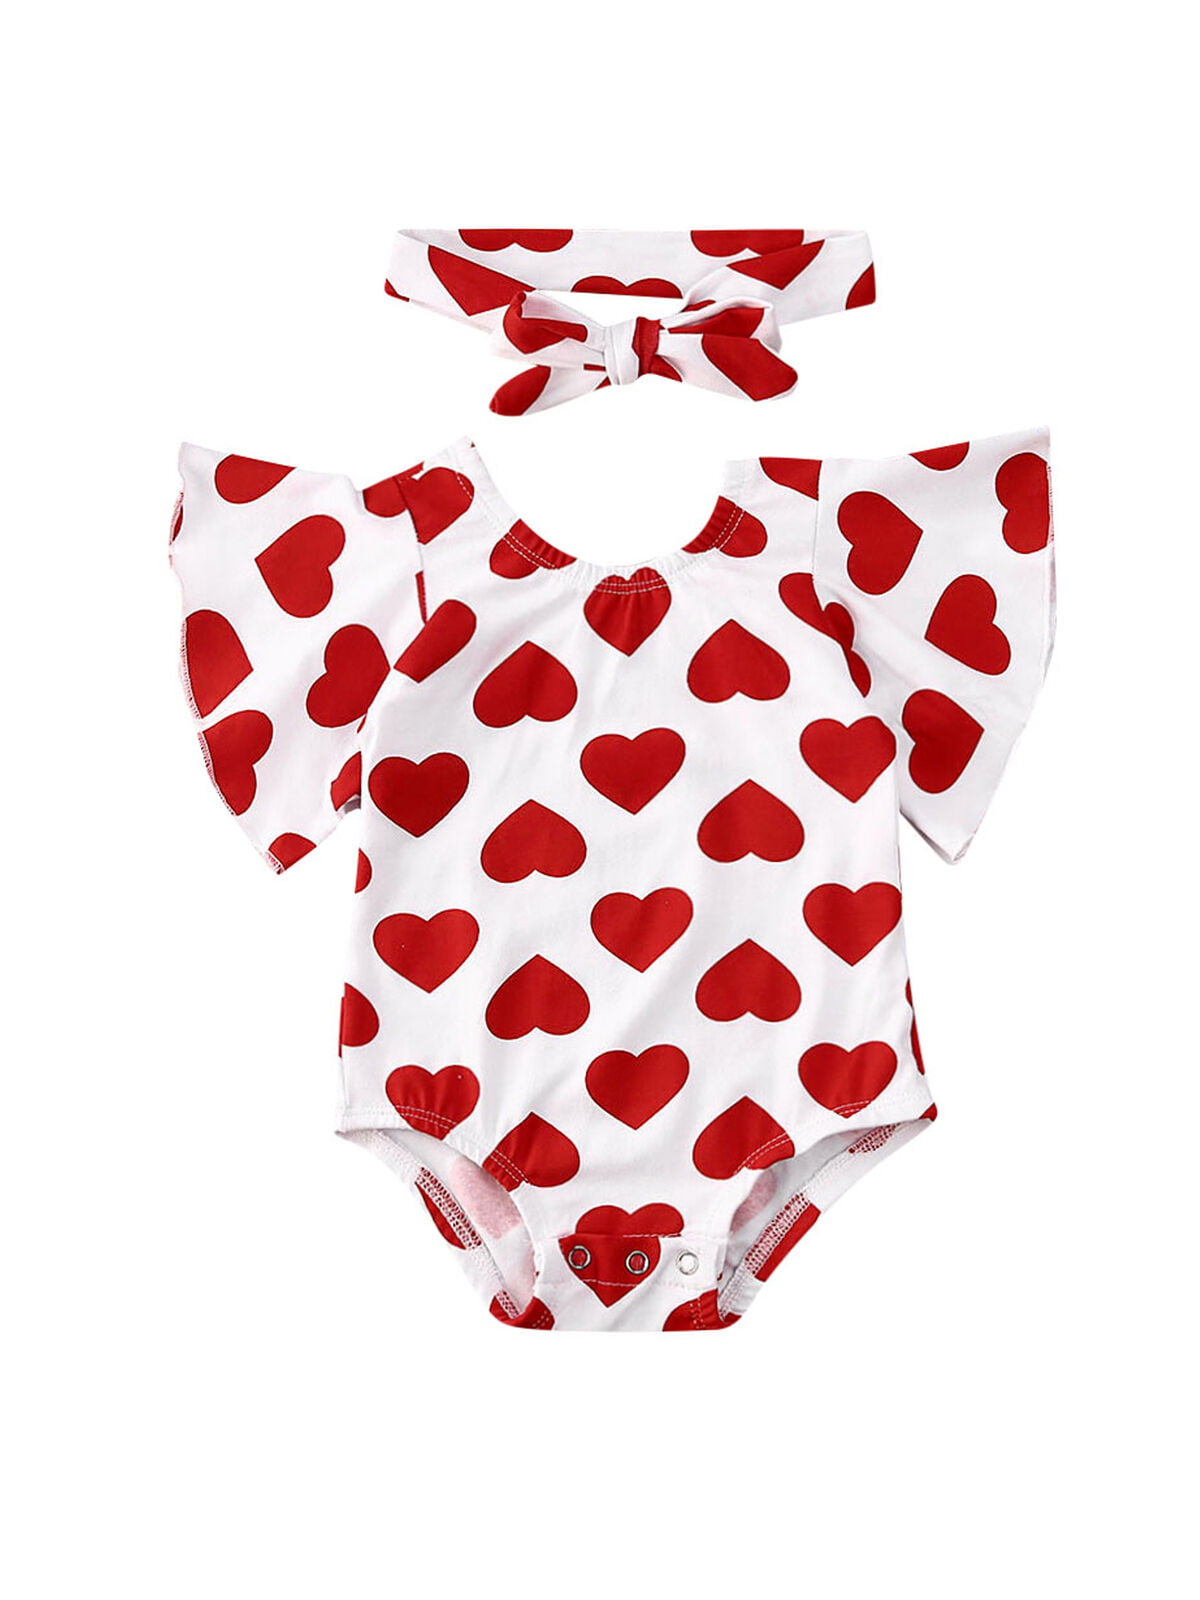 Details about   Infant Baby Girls Valentine's Day Romper Bodysuit+Hearts Suspender Skirt Outfits